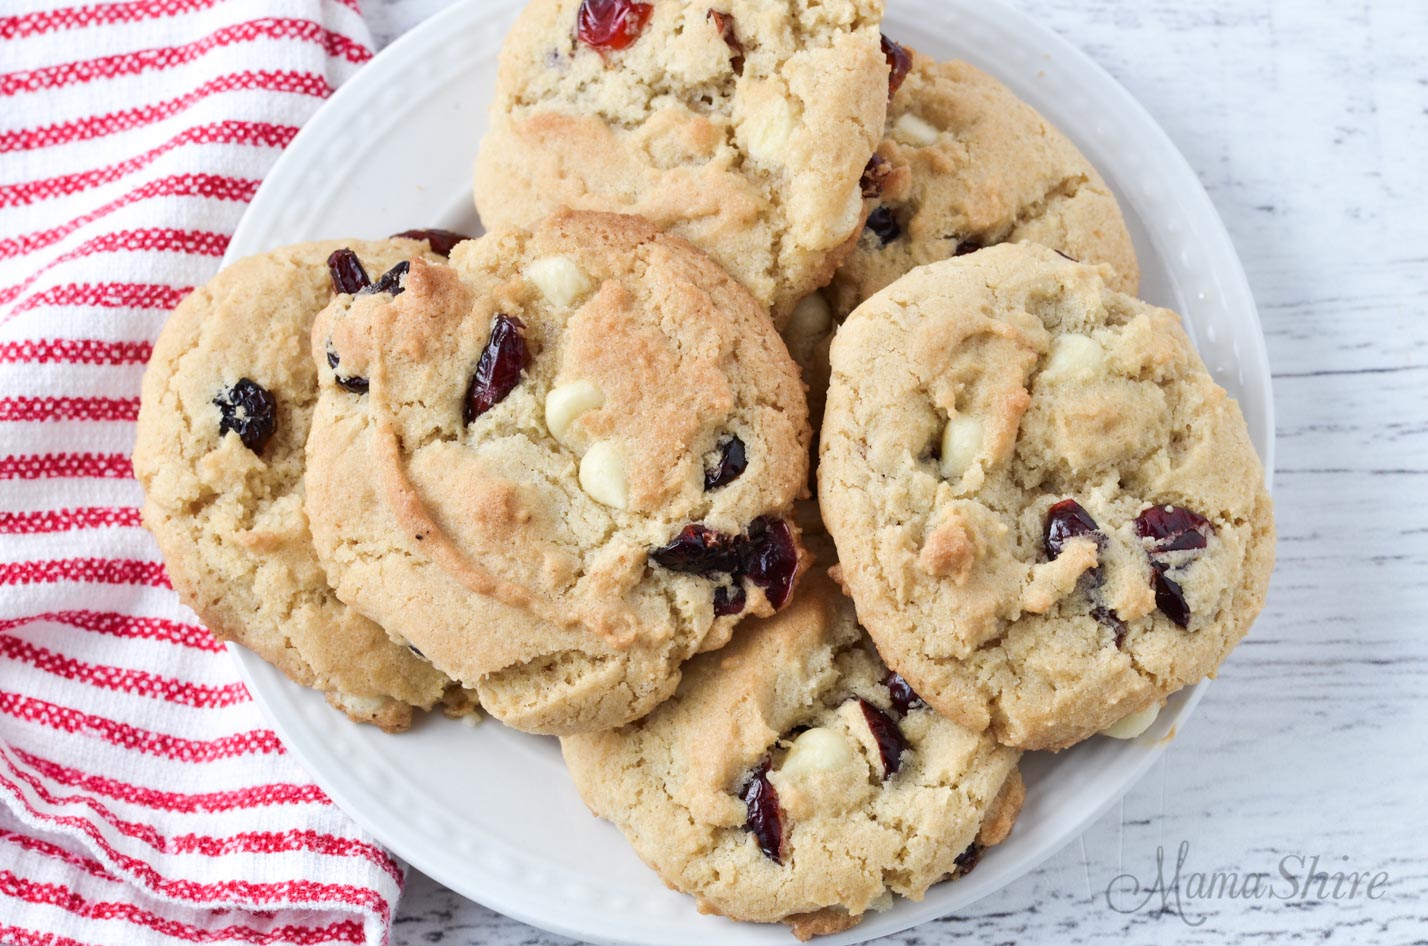 Gluten-free cookies with white chocolate chips and cranberries.